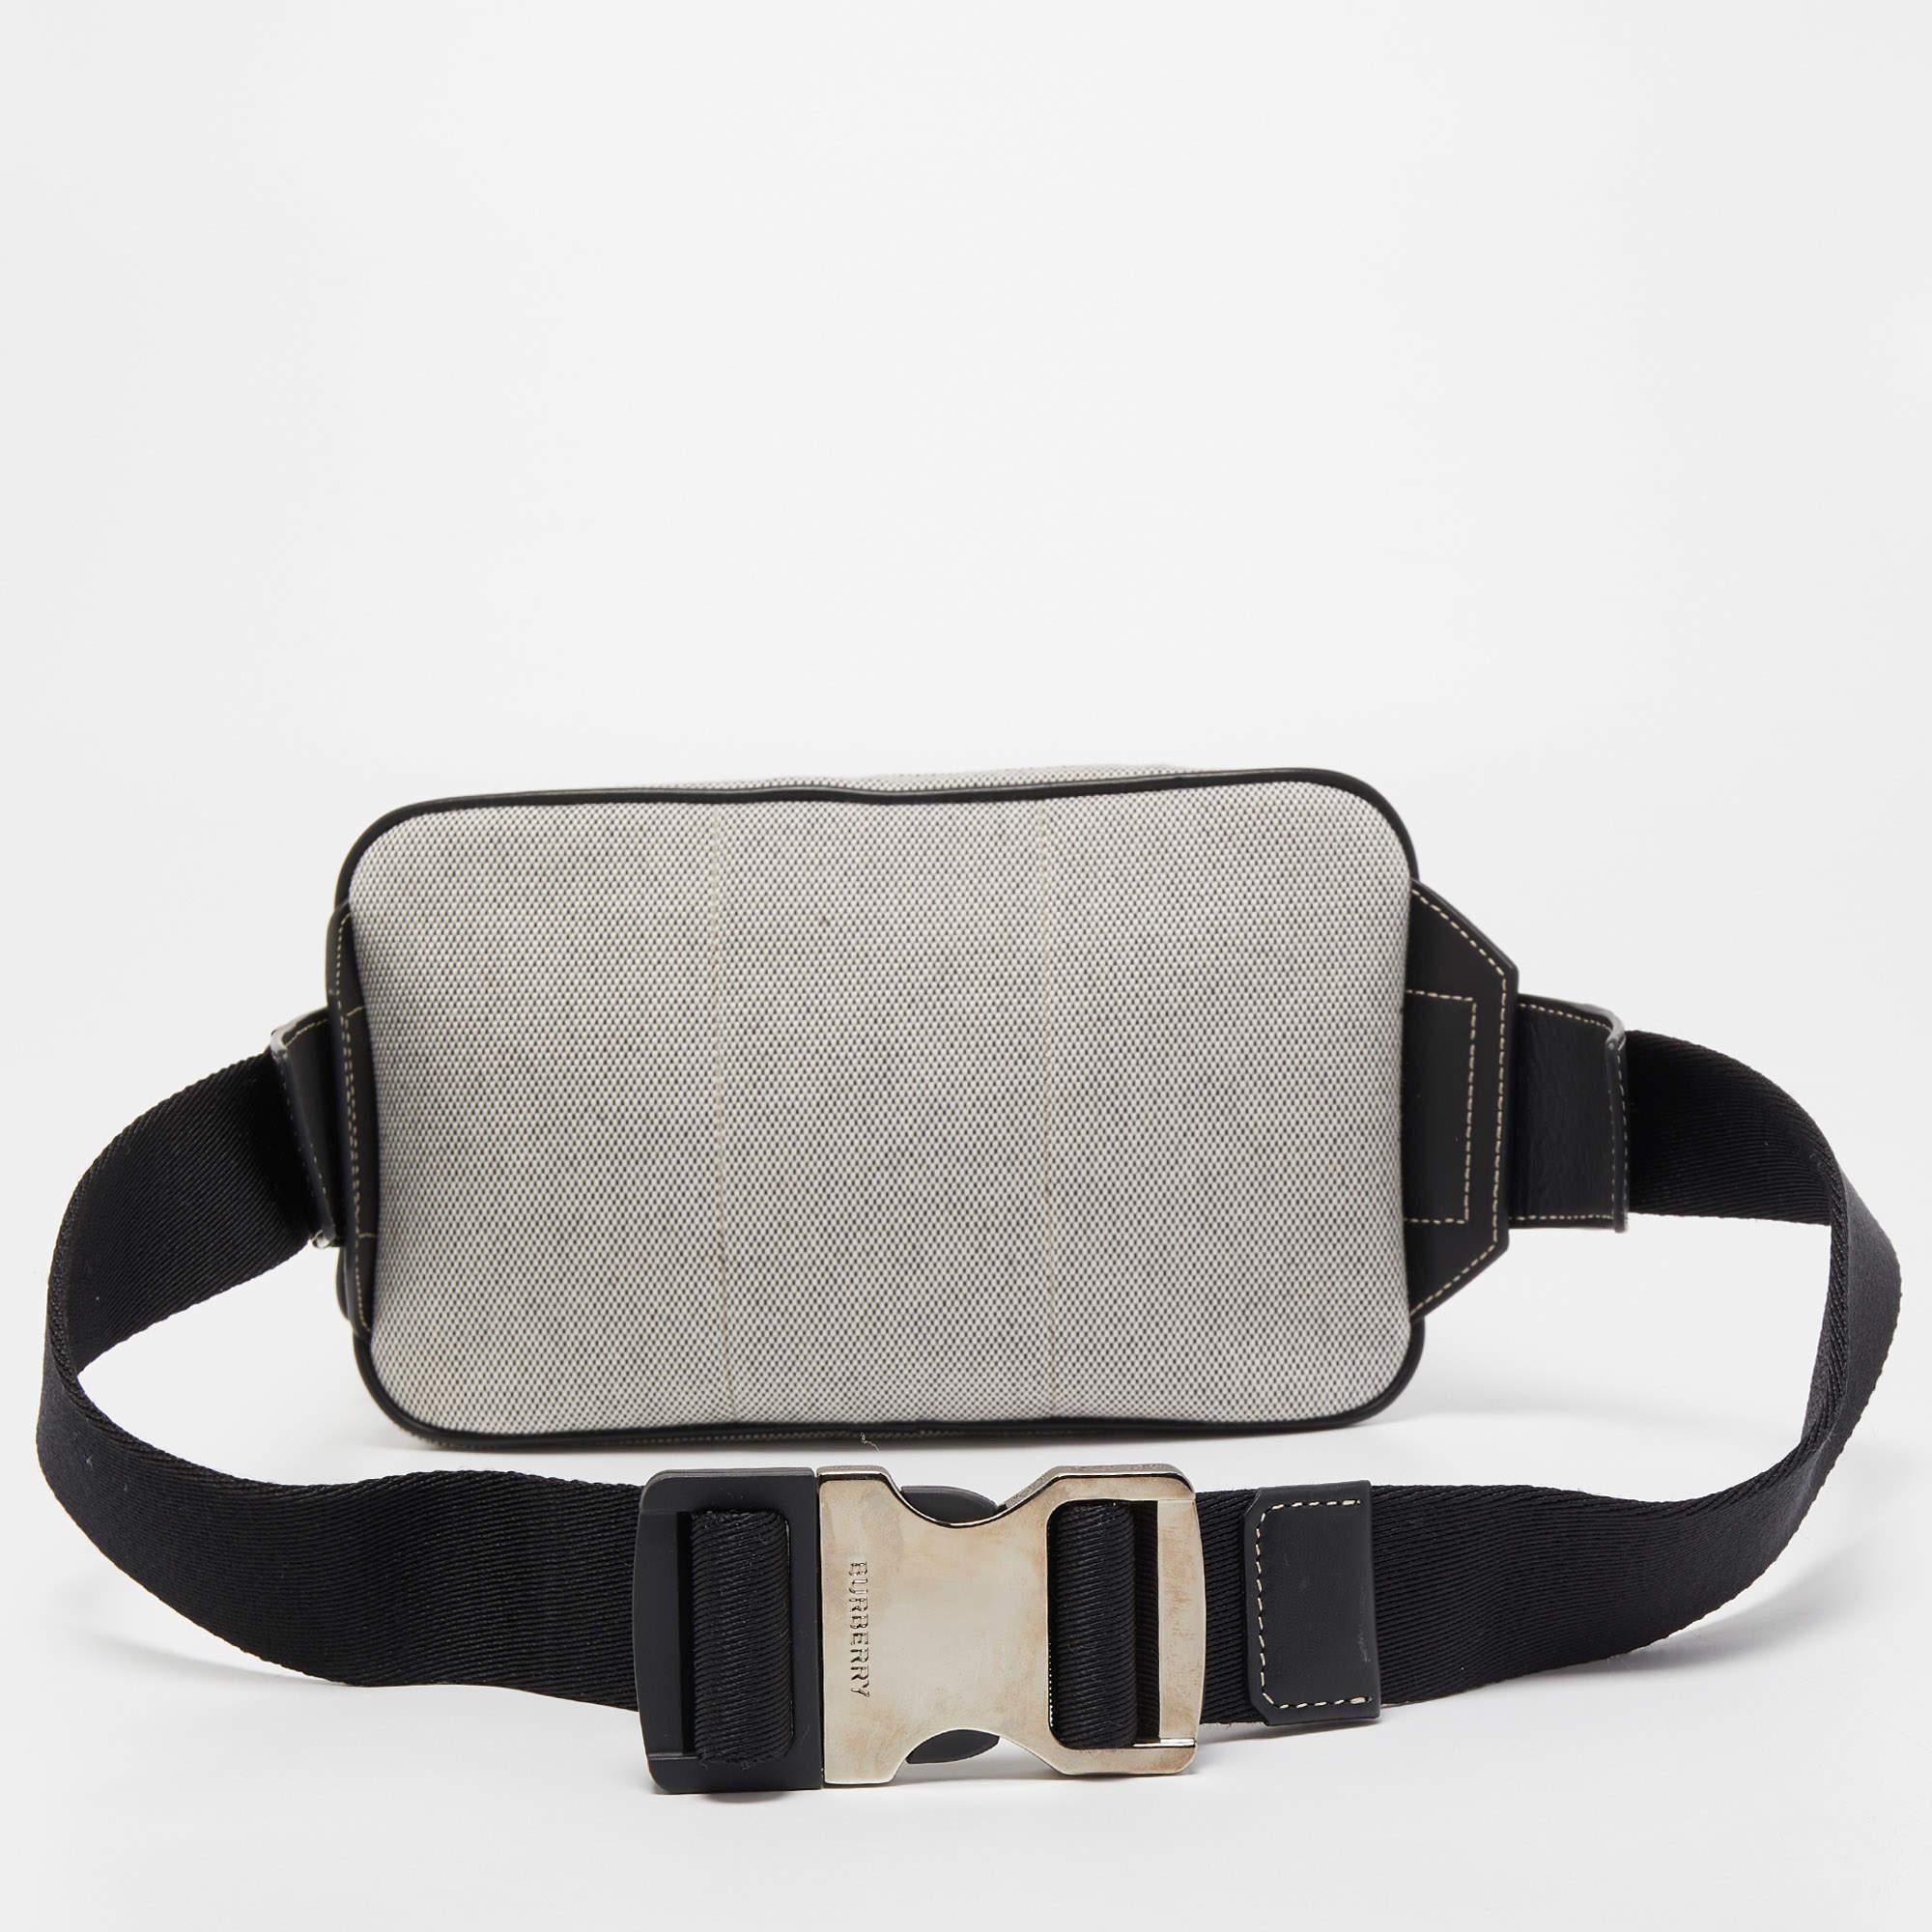 This West belt bag from the House of Burberry will help you obtain a comfortable and classy style! Designed using leather and canvas, this bag showcases silver-tone fittings with a spacious interior. Carry your belongings stylishly in this smart